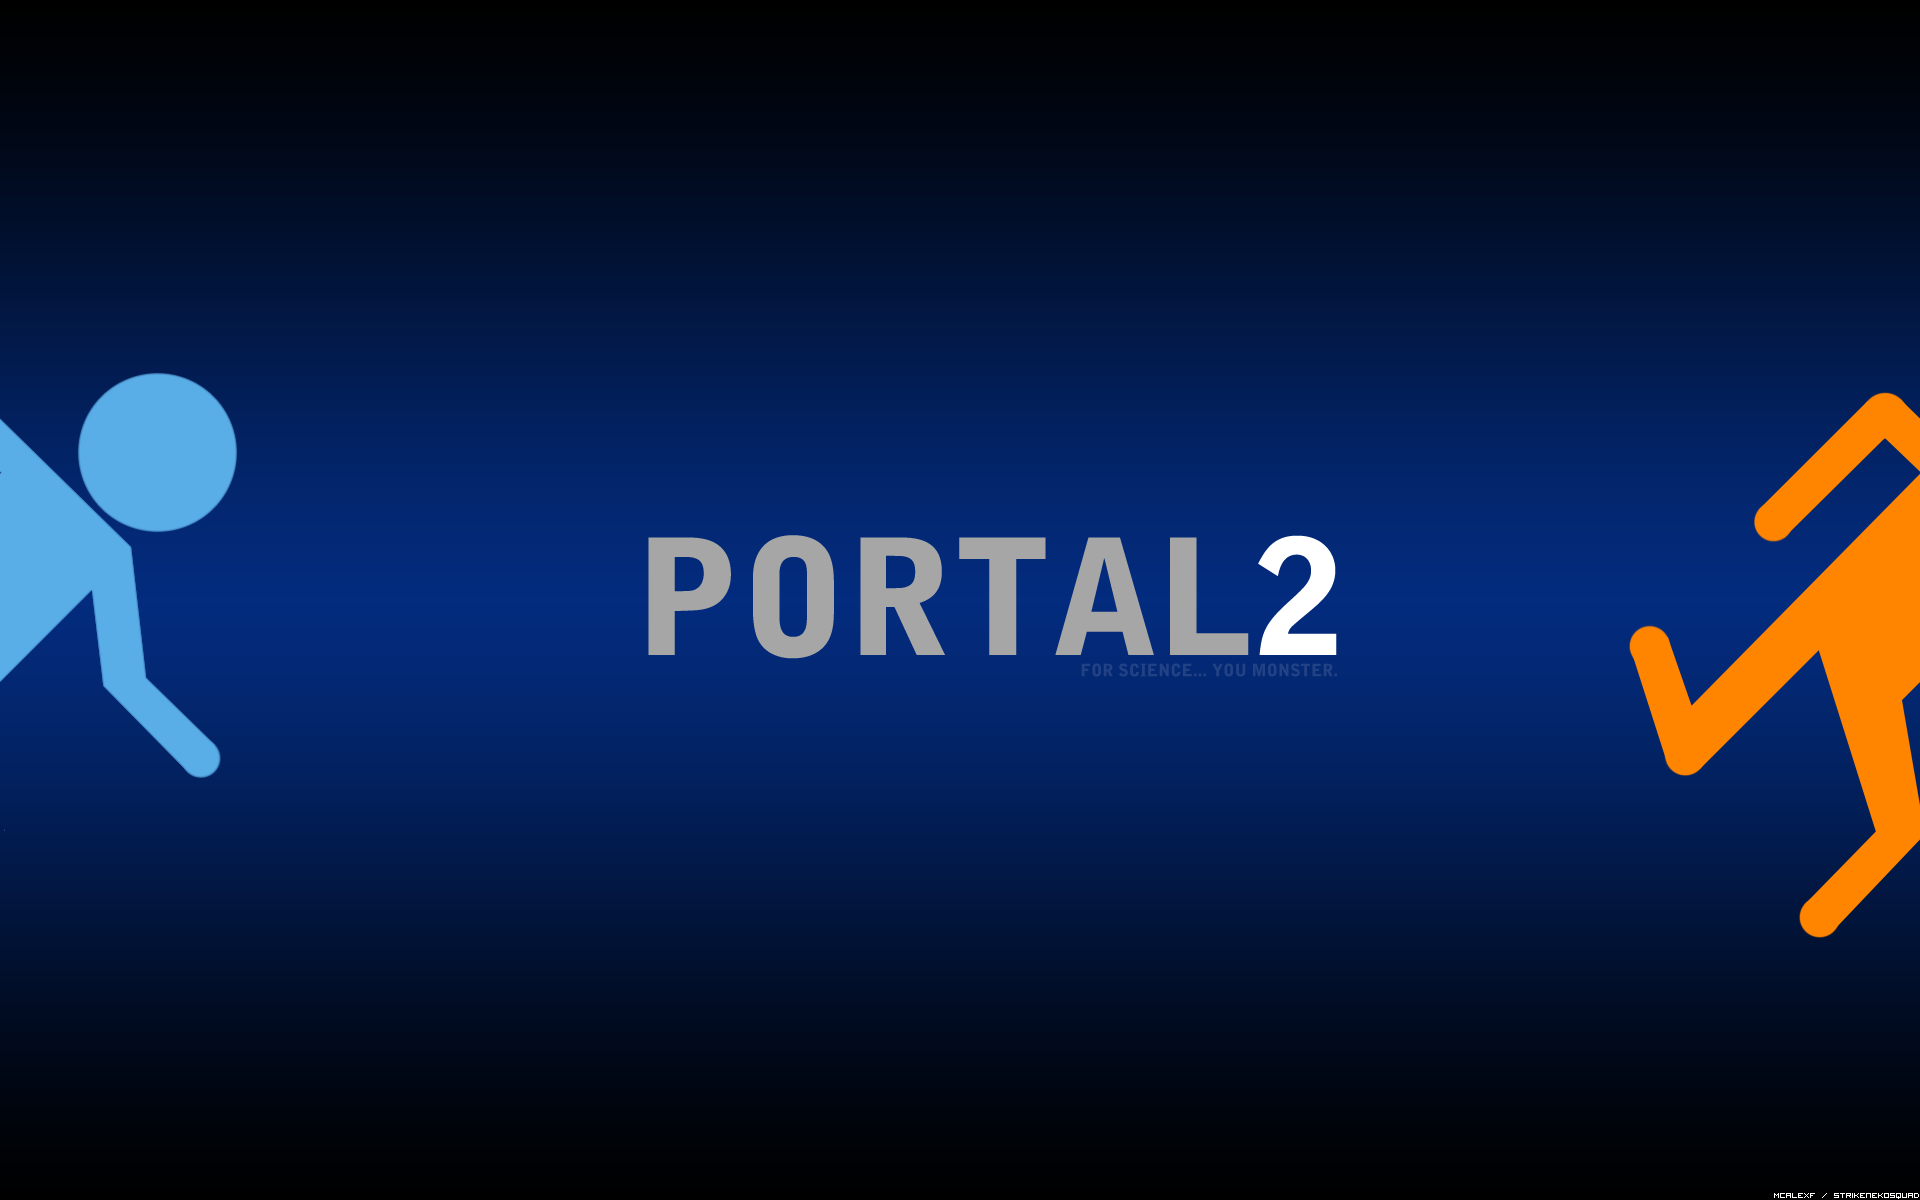 Portal 2 Wallpapers   Full HD wallpaper search   page 8